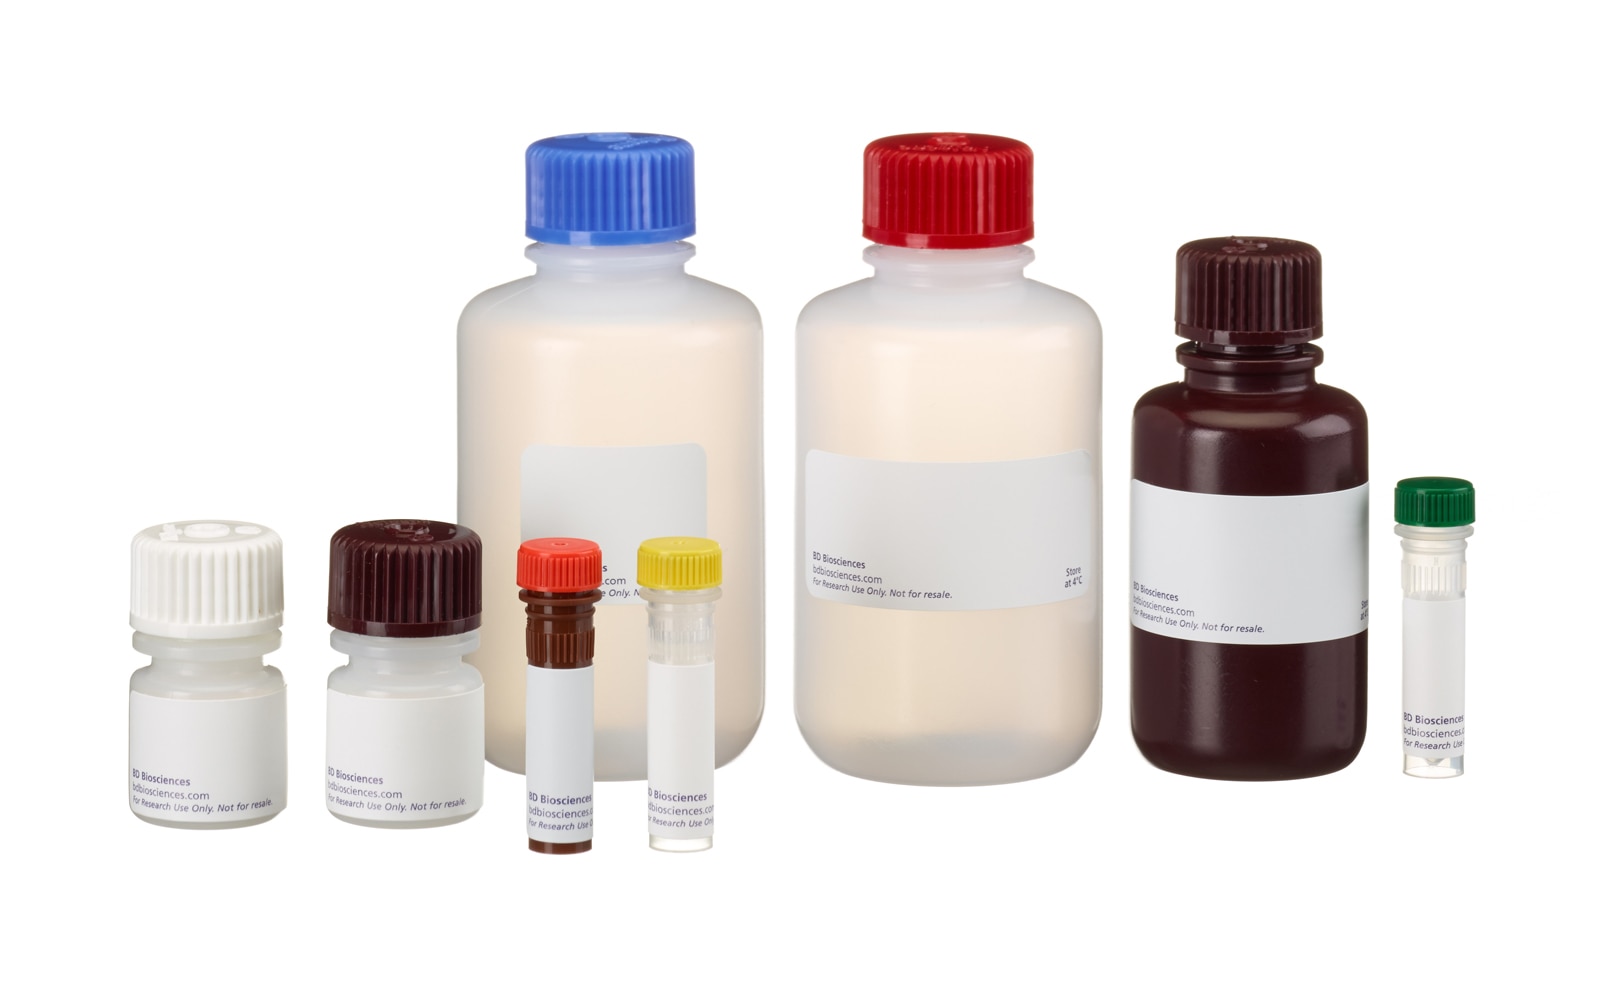 TACS-XL In Situ Apoptosis Detection Kit - TACS Blue 4828-30-BK: R&D Systems